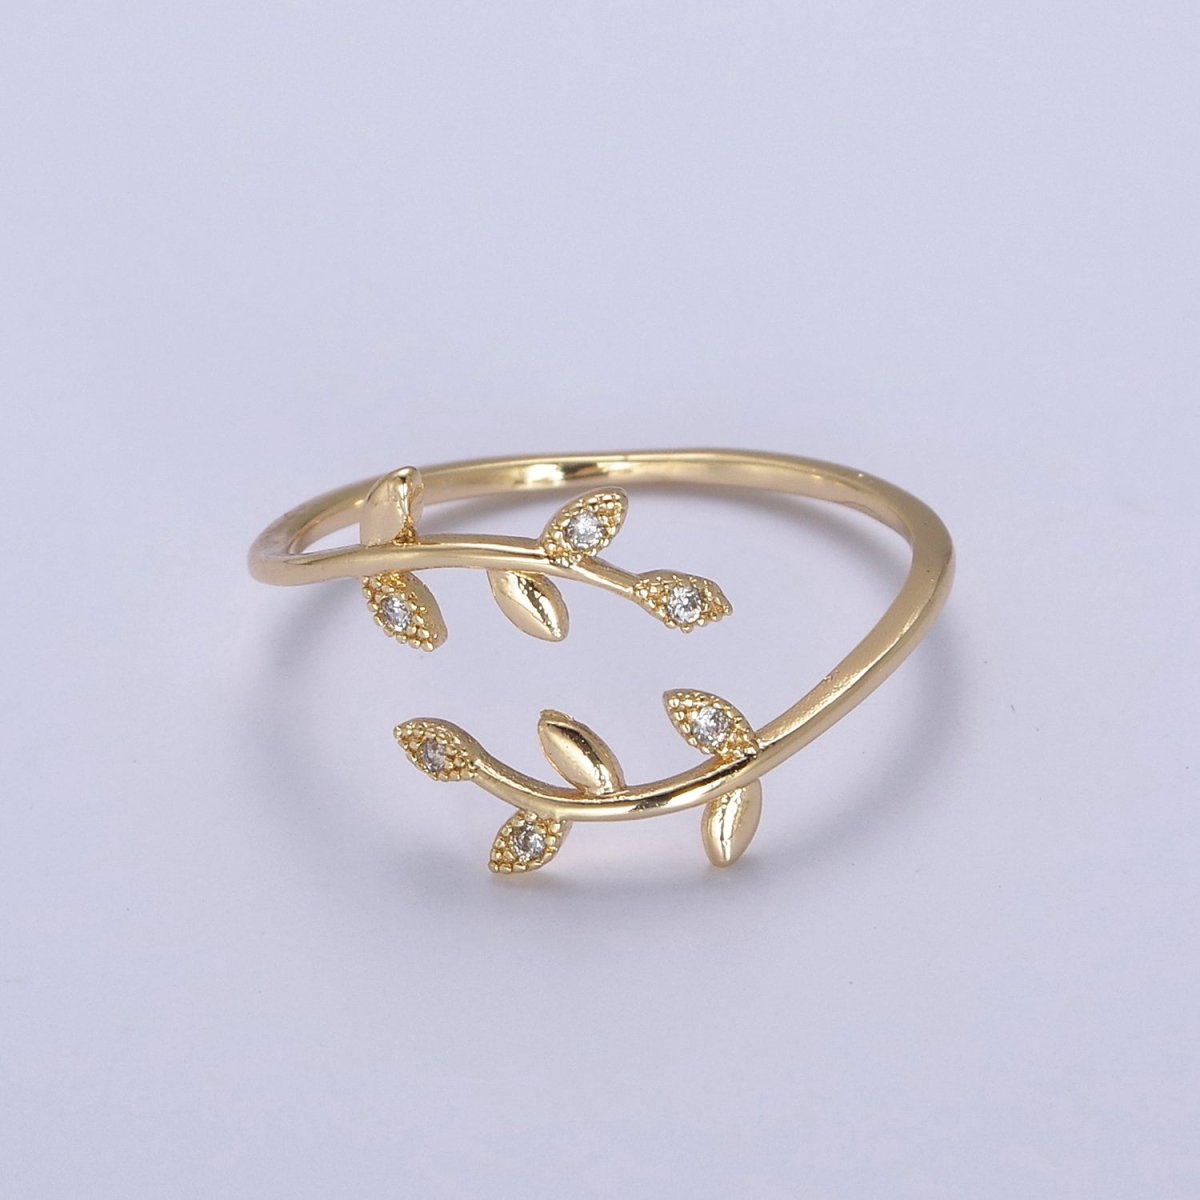 Micro Pave Olive Vine Leaf Adjustable Ring, Crystal Cubic Zirconia CZ Mother Nature Stacking Ring, Minimalist 16K Gold Filled Ring, Gift For Her Plant Mom U-436 - DLUXCA